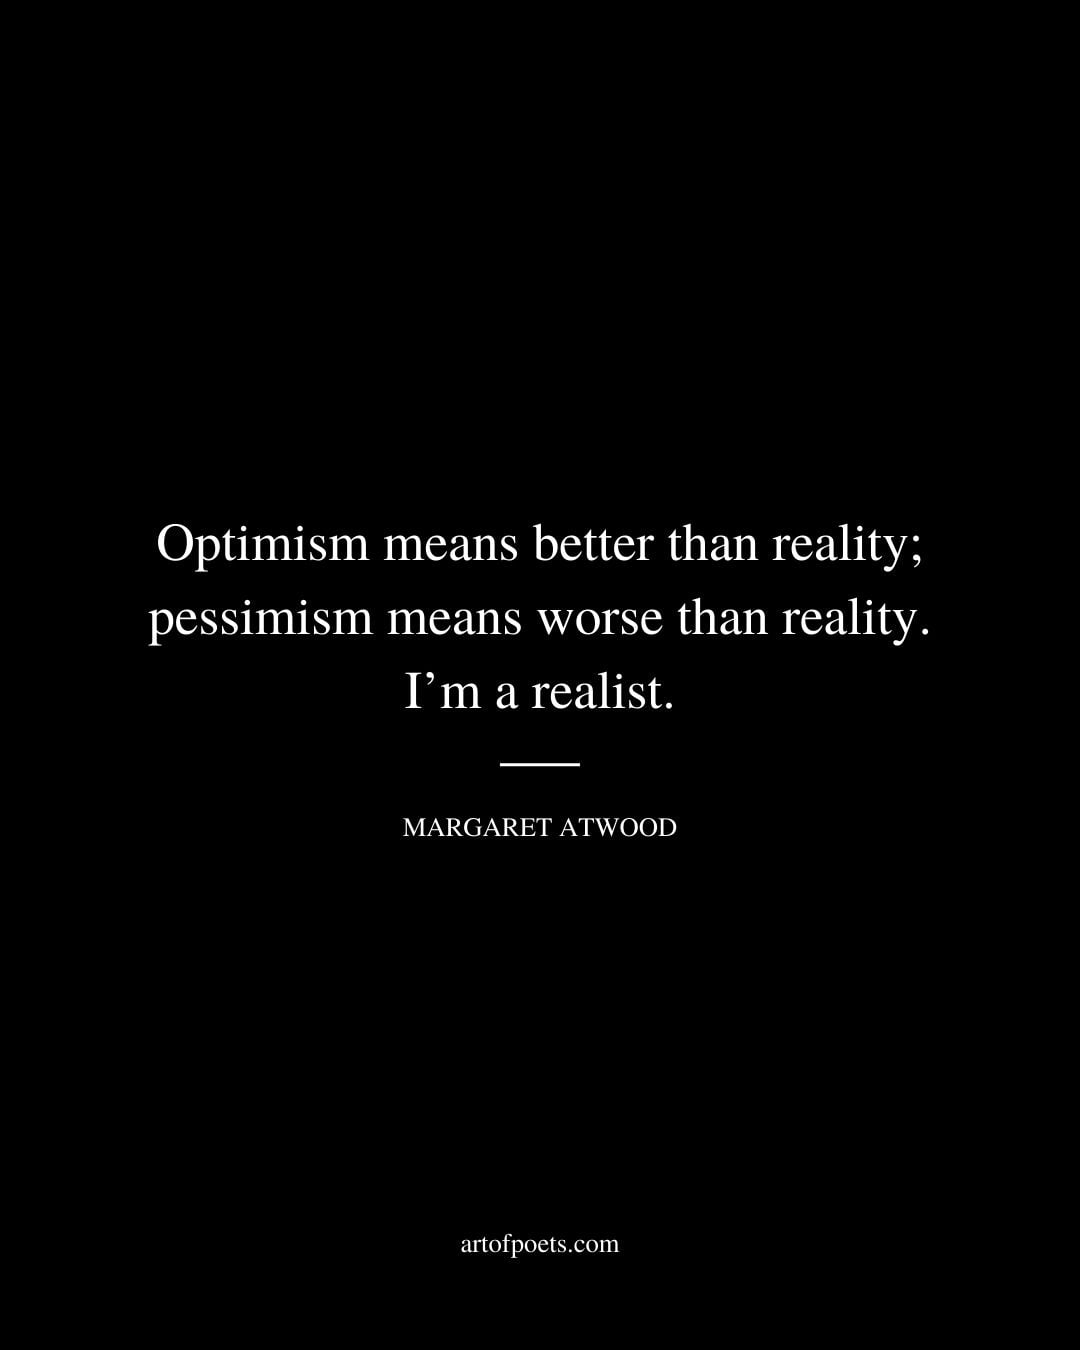 Optimism means better than reality pessimism means worse than reality. Im a realist. Margaret Atwood